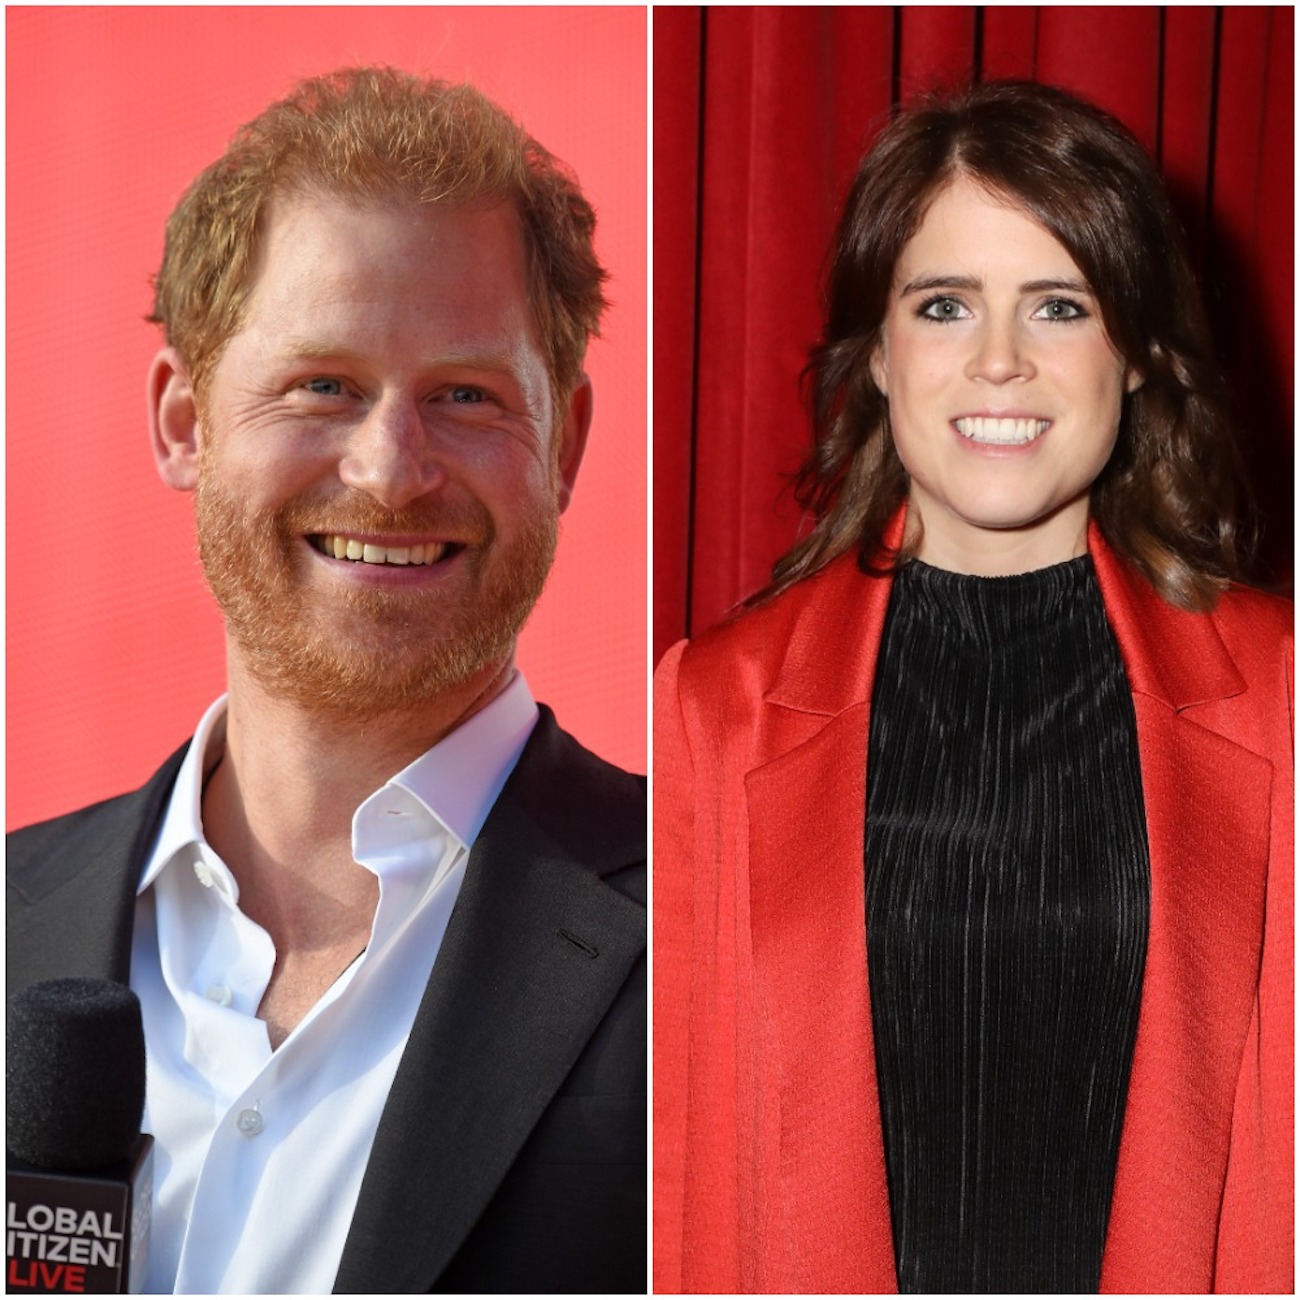 Prince Harry smiles holding a mic; Princess Eugenie smiles wearing a red outfit